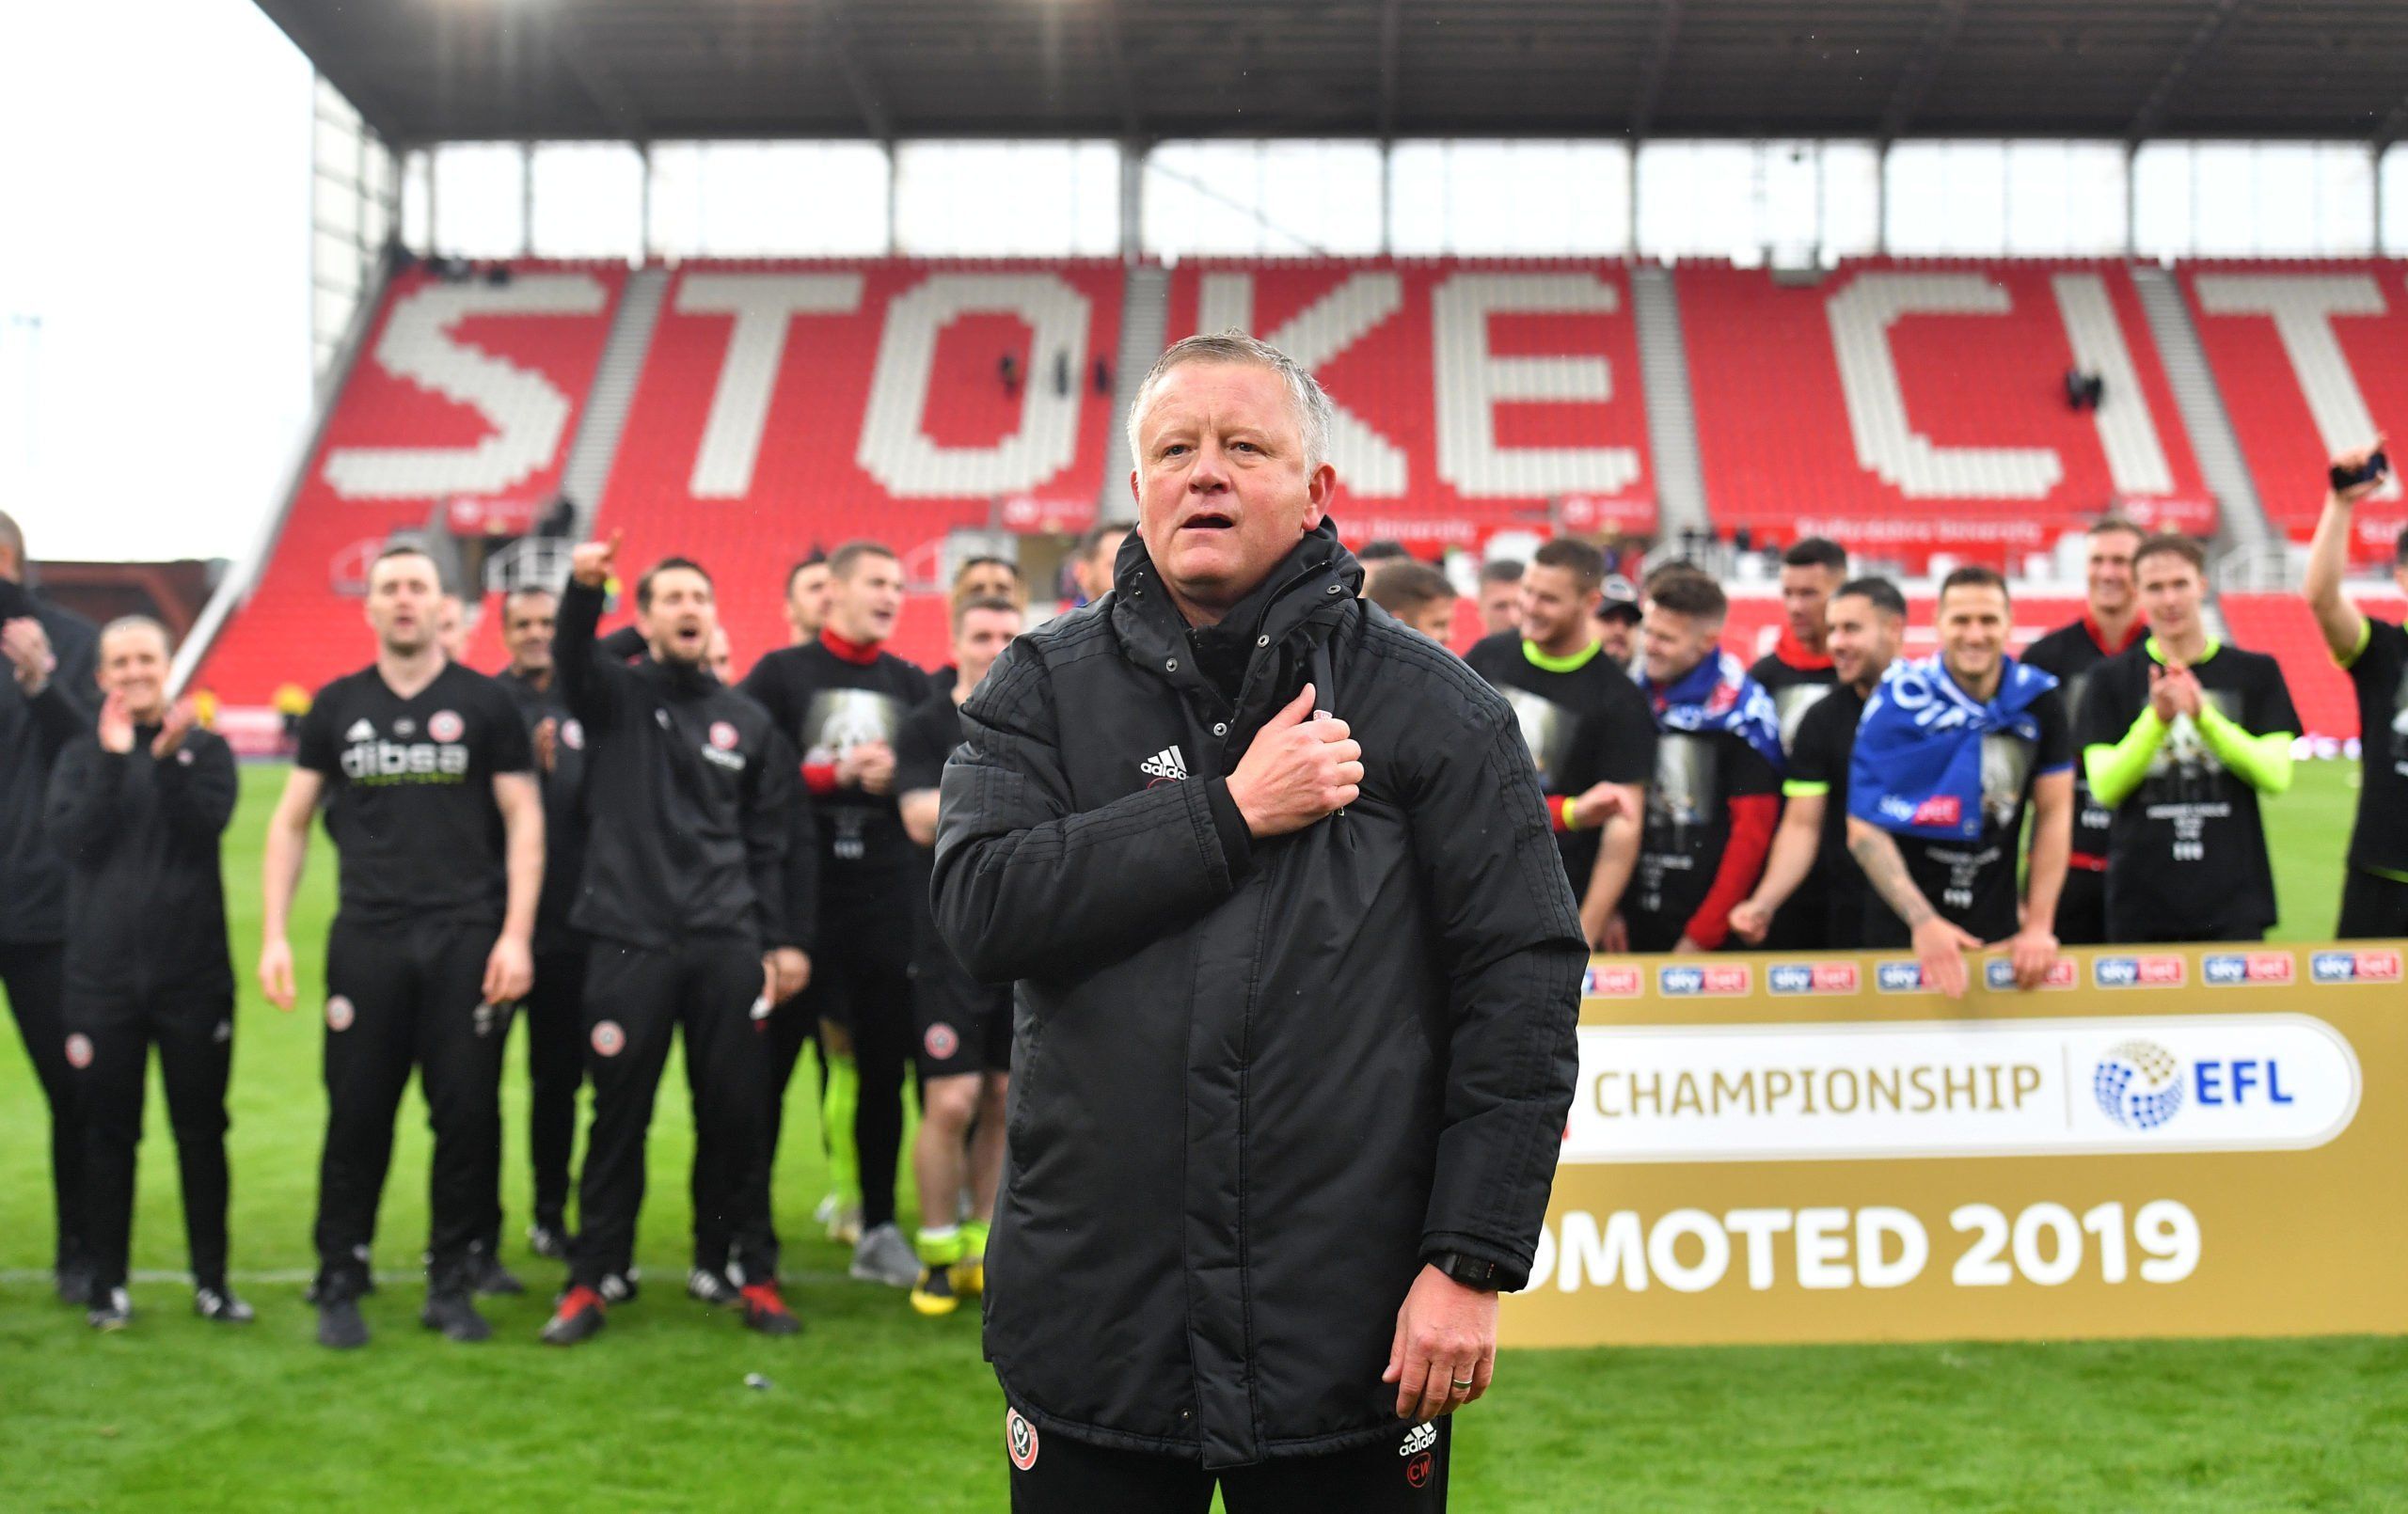 Premier League: Chris Wilder departs Sheffield United, Paul Heckingbottom to take charge